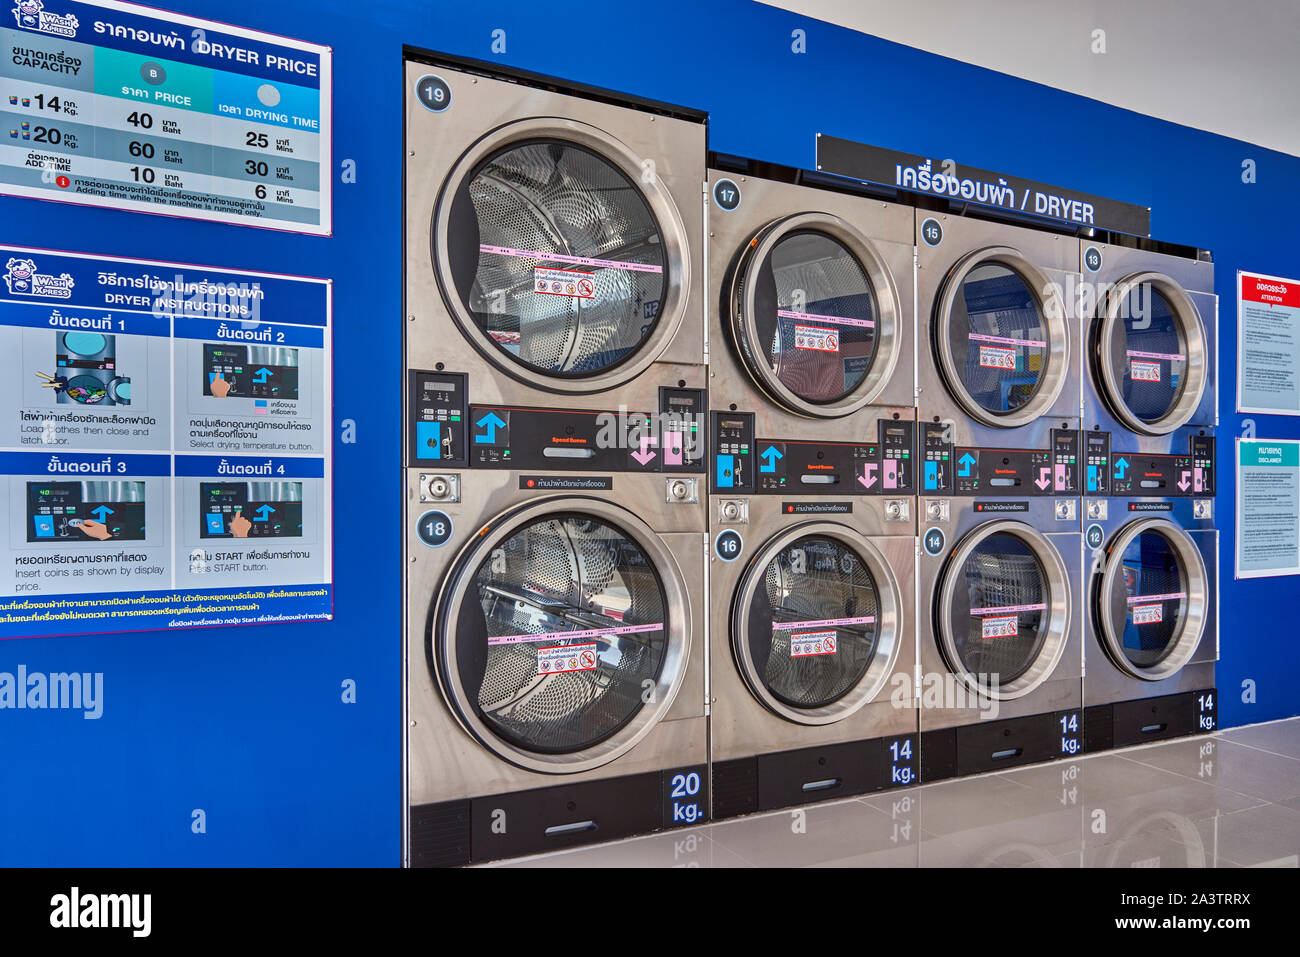 Laundromat drying machines. Clothes dryer machinery. Thailand Southeast Asia Stock Photo